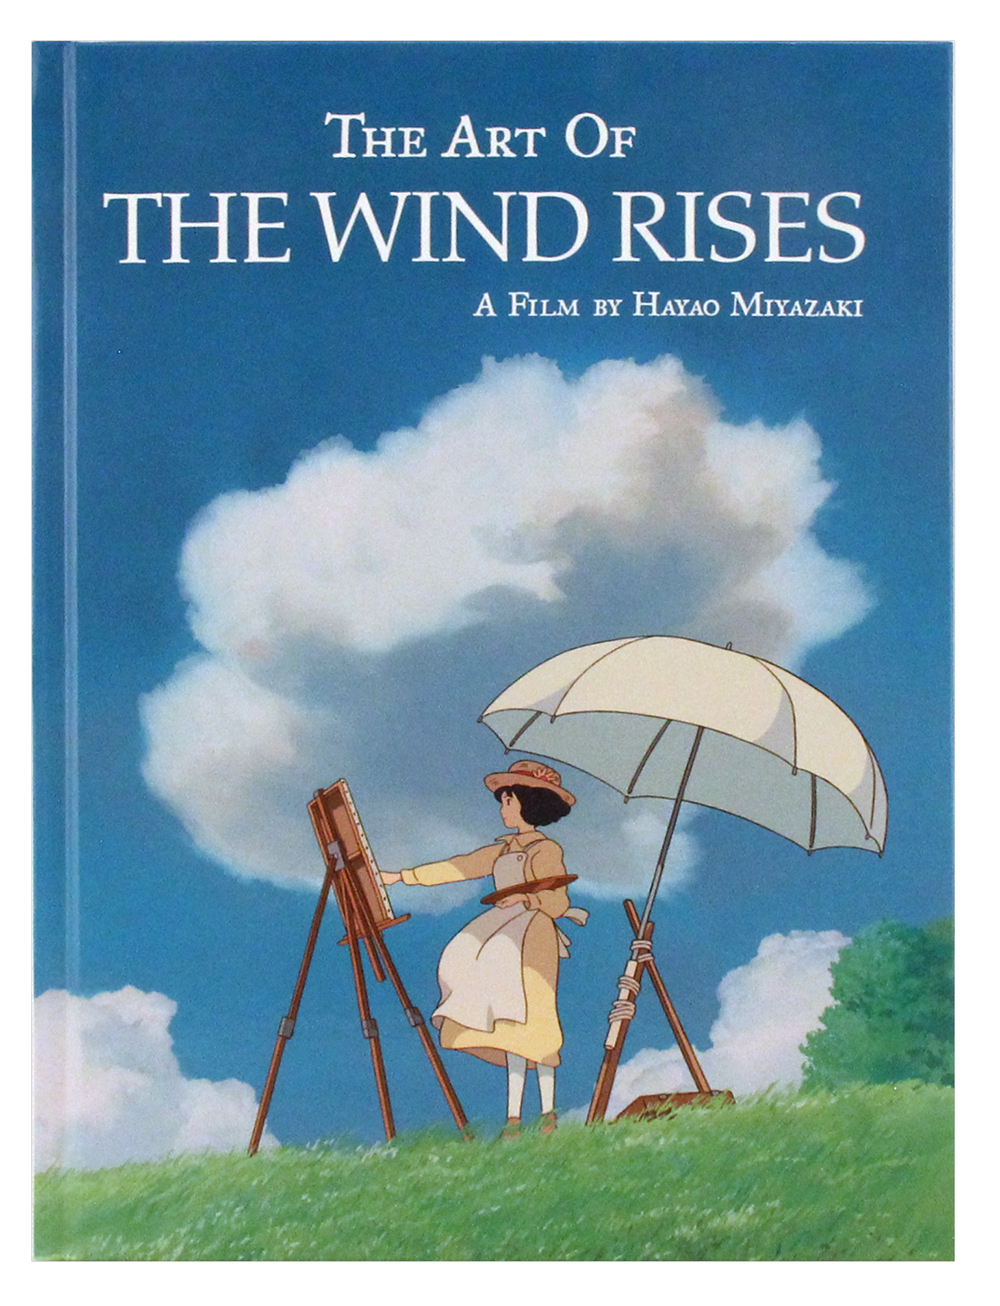 The Art of the Wind Rises